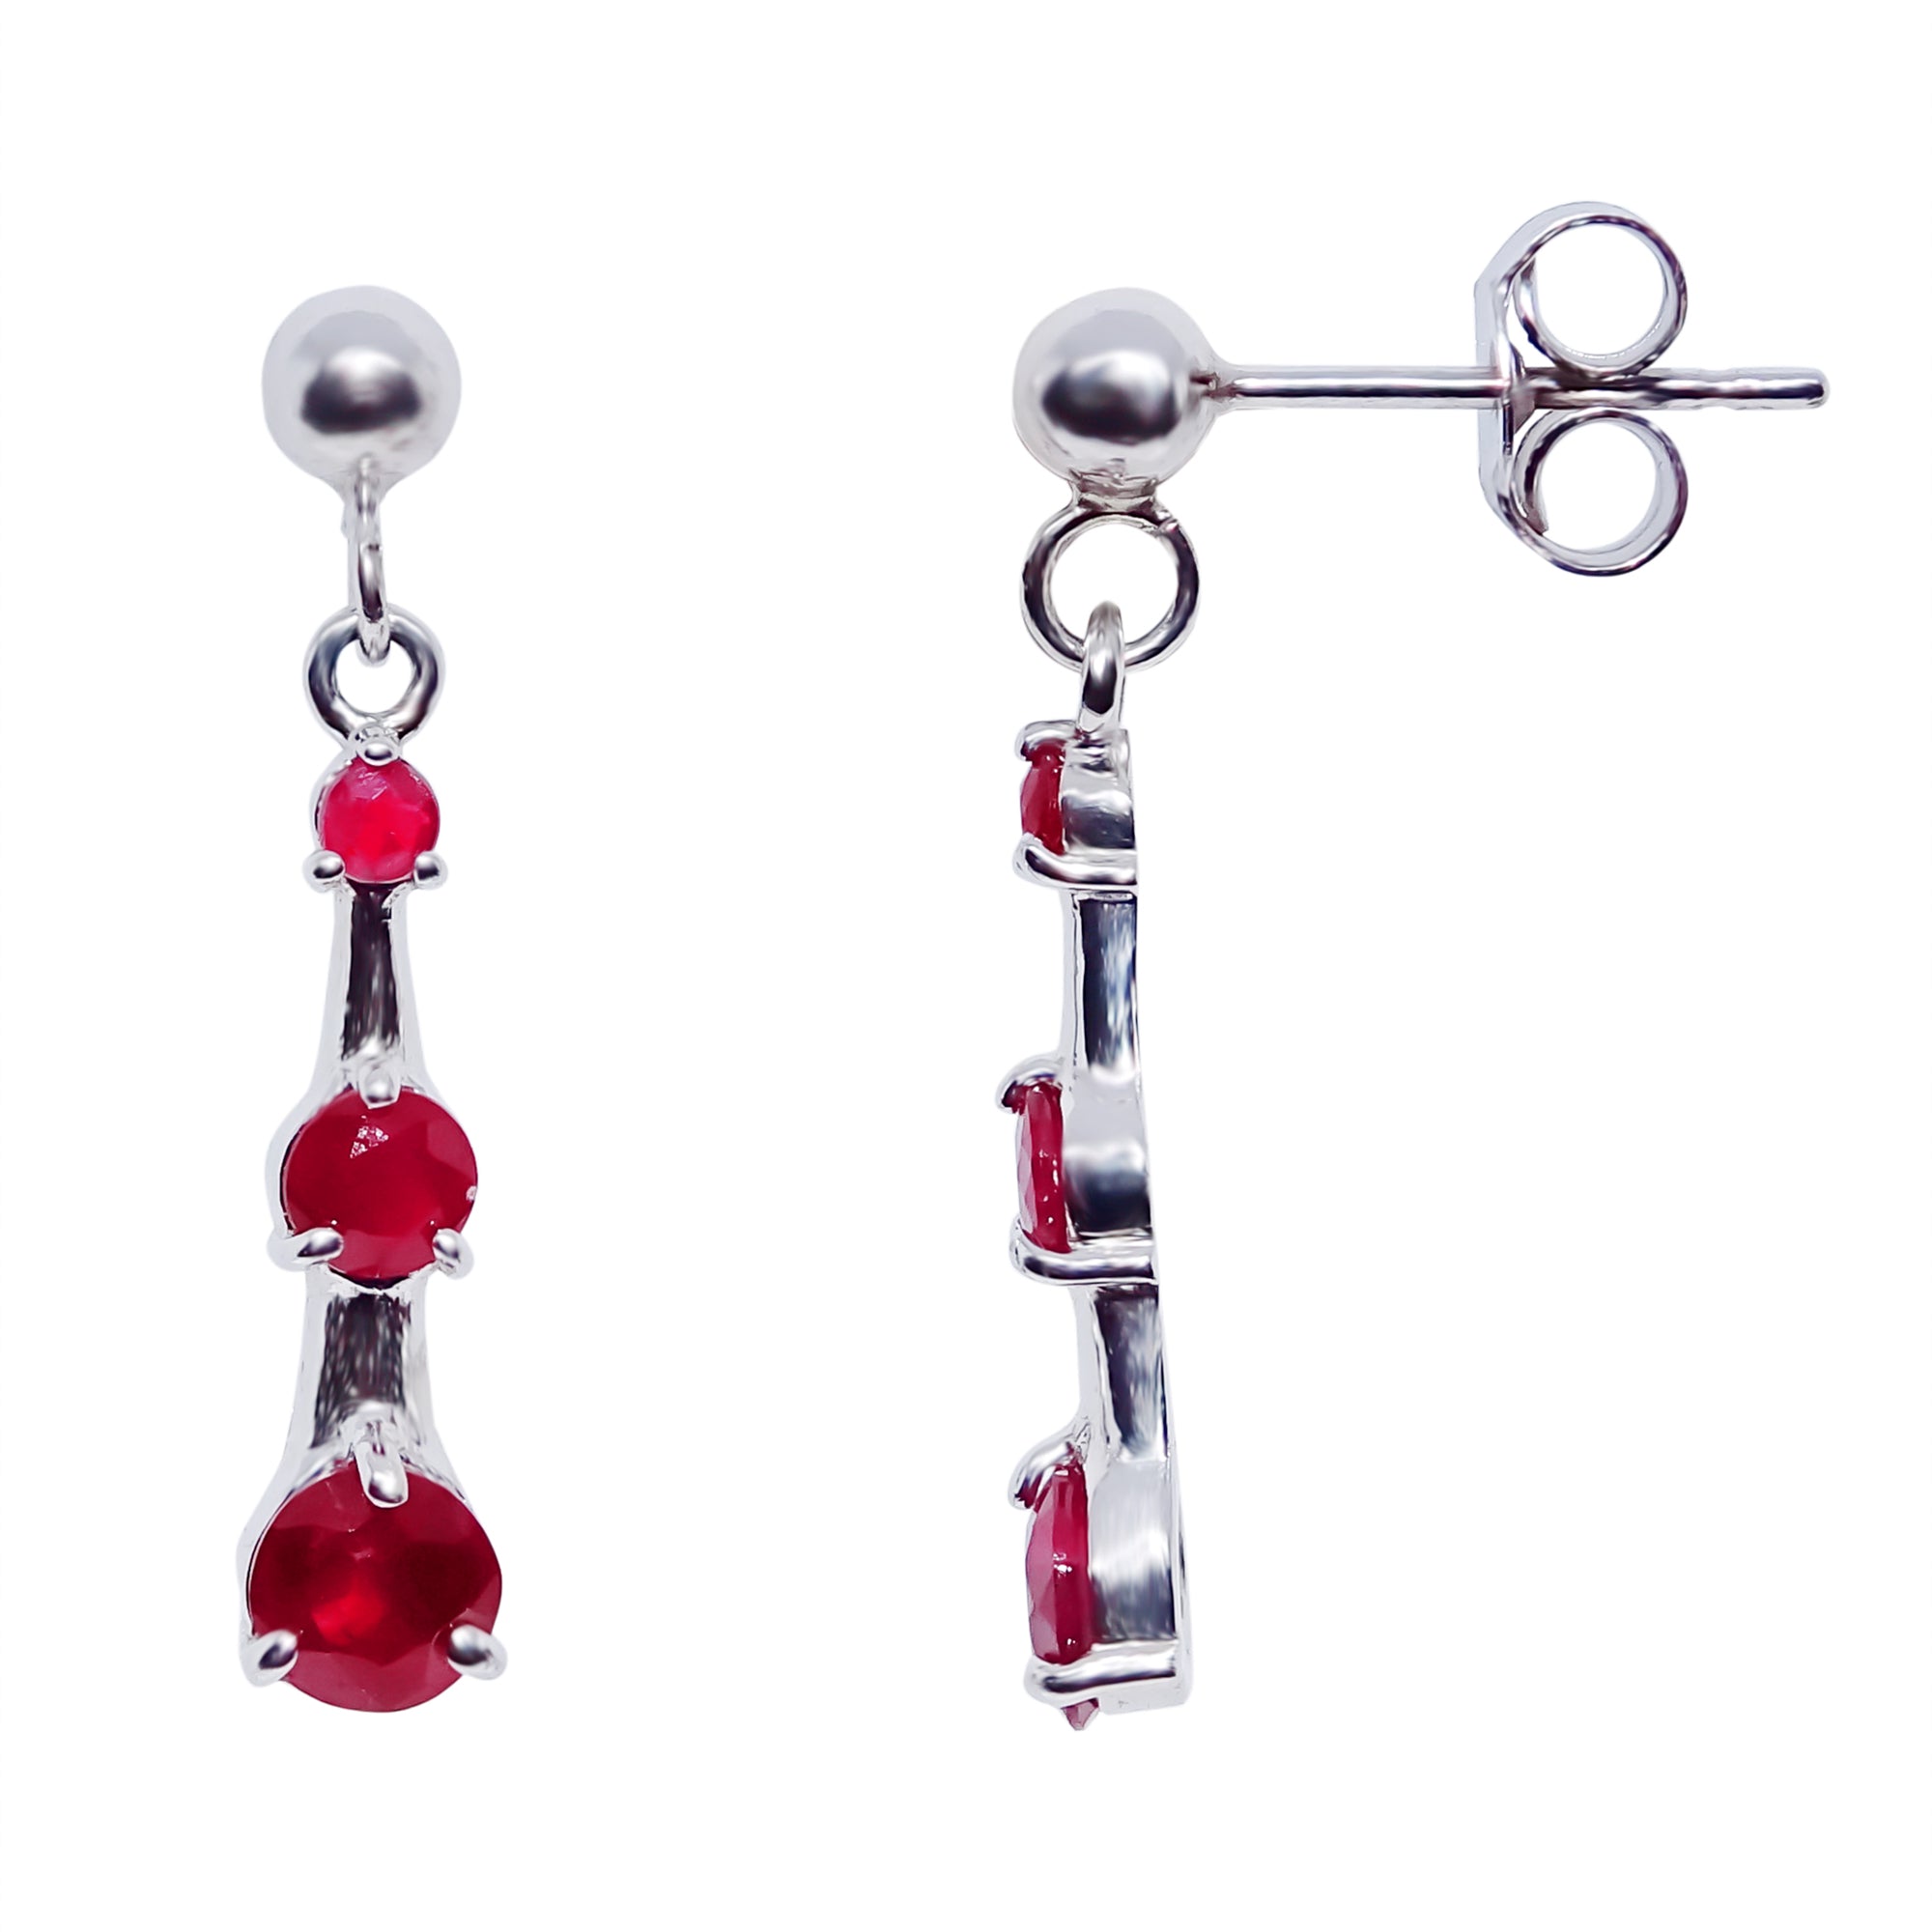 9ct white gold triple round ruby (2,3 & 4mm) drop earrings